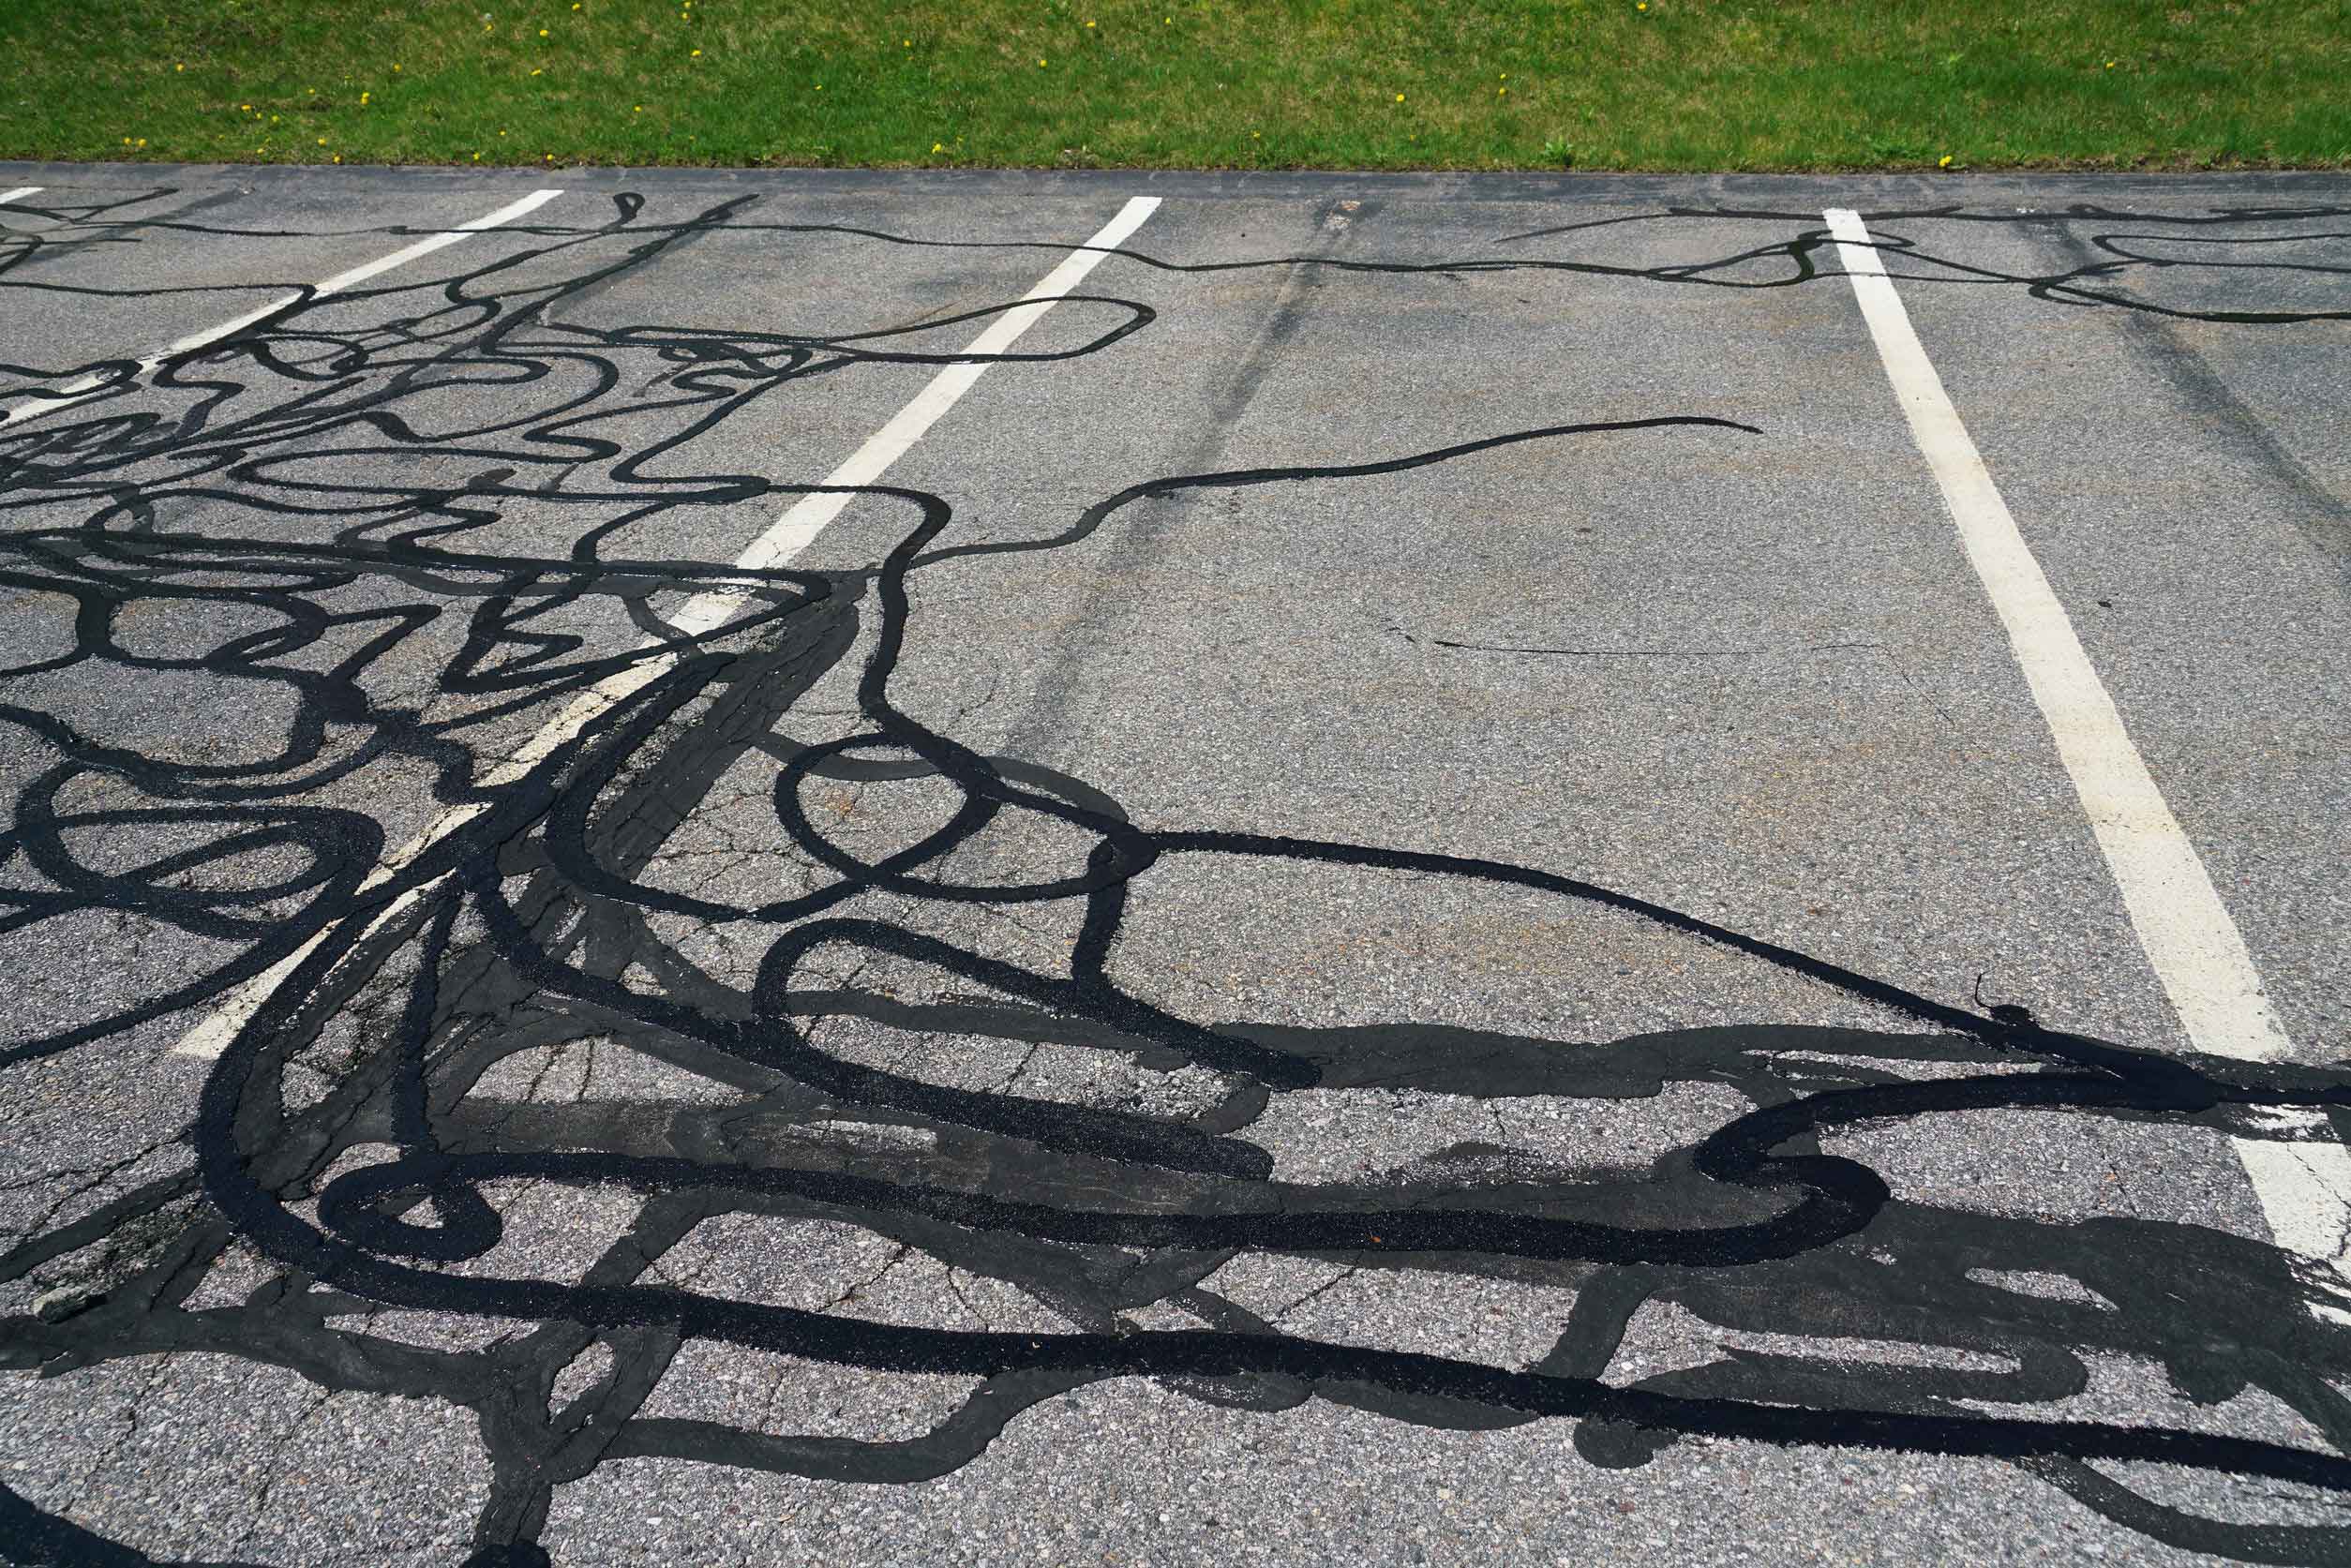 Pattern over parking spaces from cracked asphalt